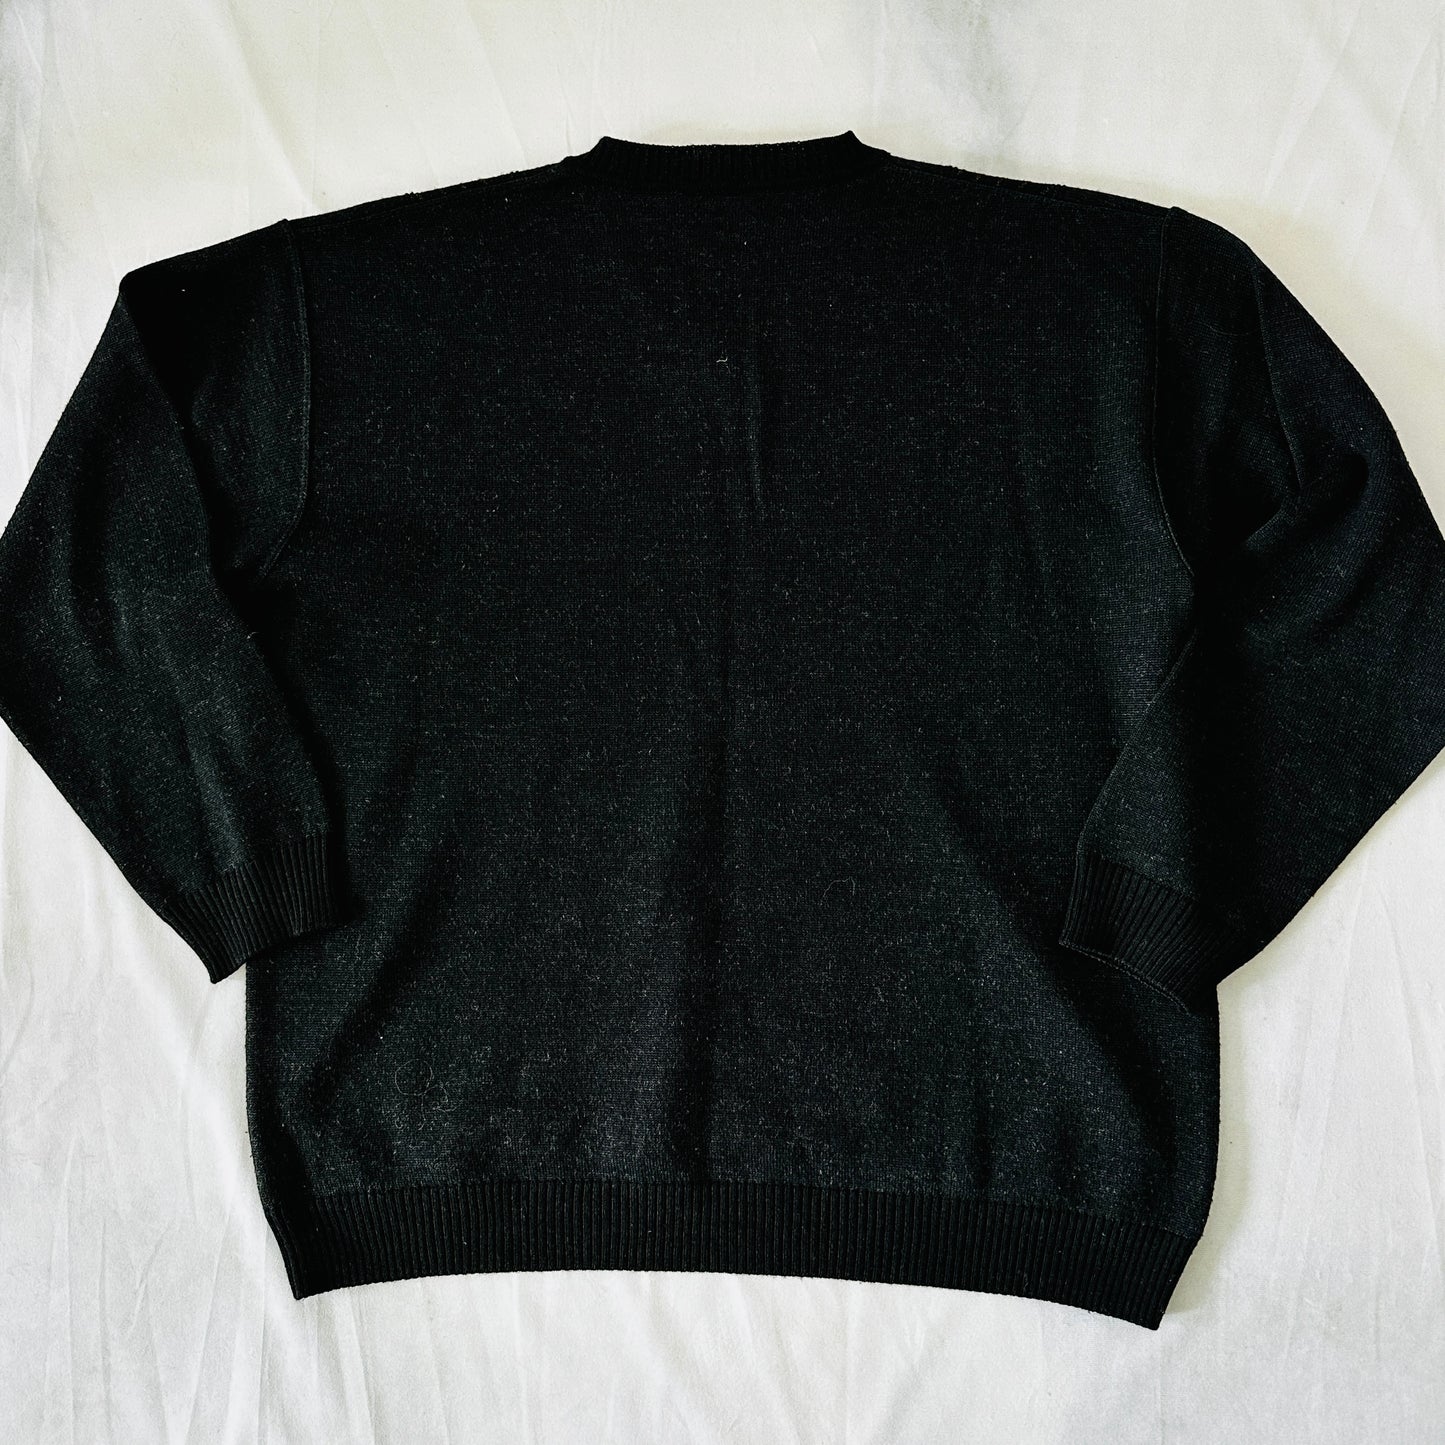 Dardano Vintage Sweater - 56 / XXL  - Made in Italy